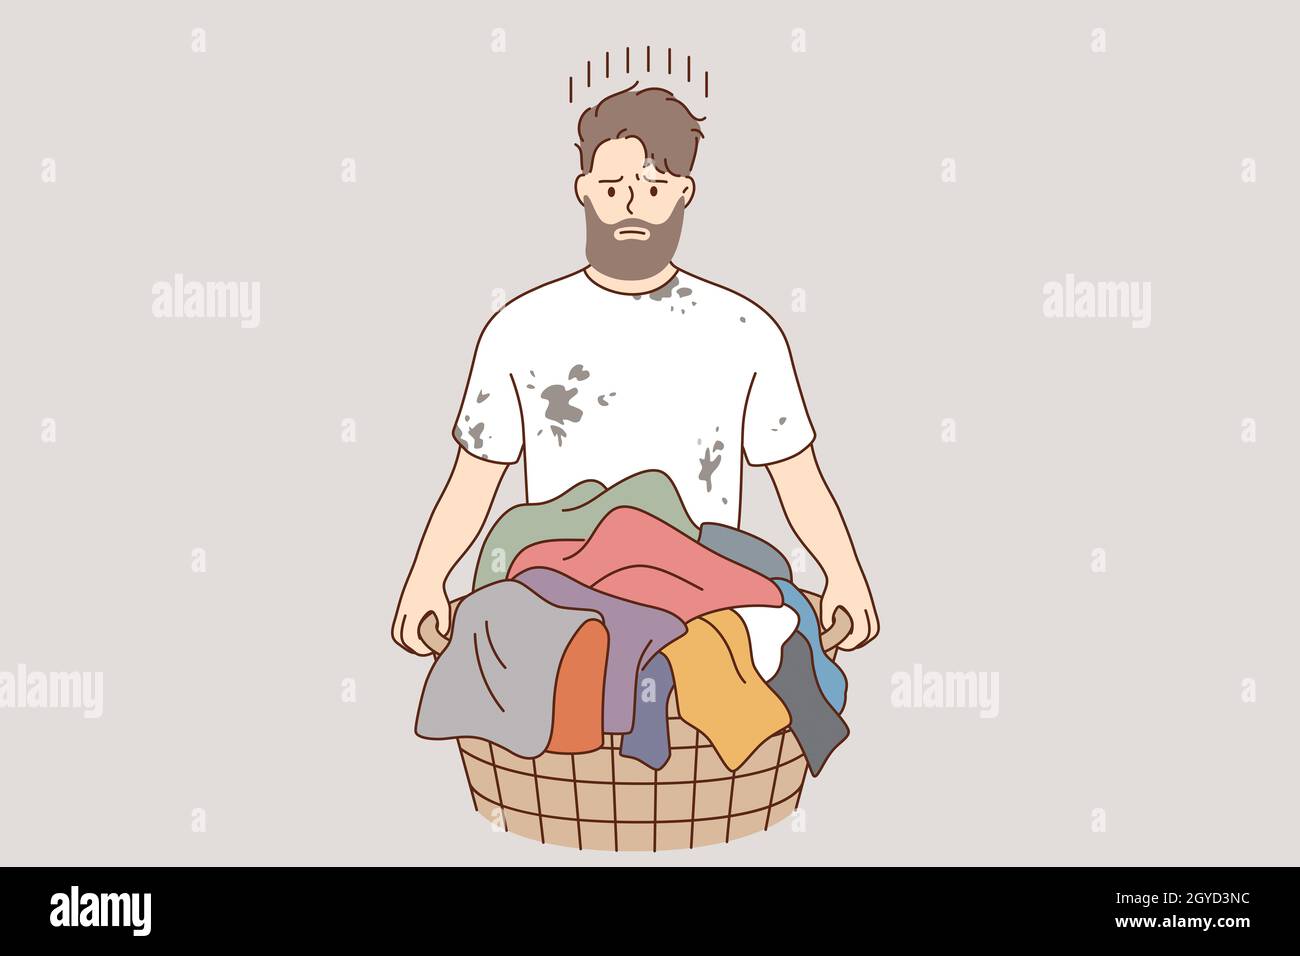 Laundry and washing clothes concept. Young frustrated stressed man cartoon character standing and holding basket with dirty colorful clothes for laund Stock Photo